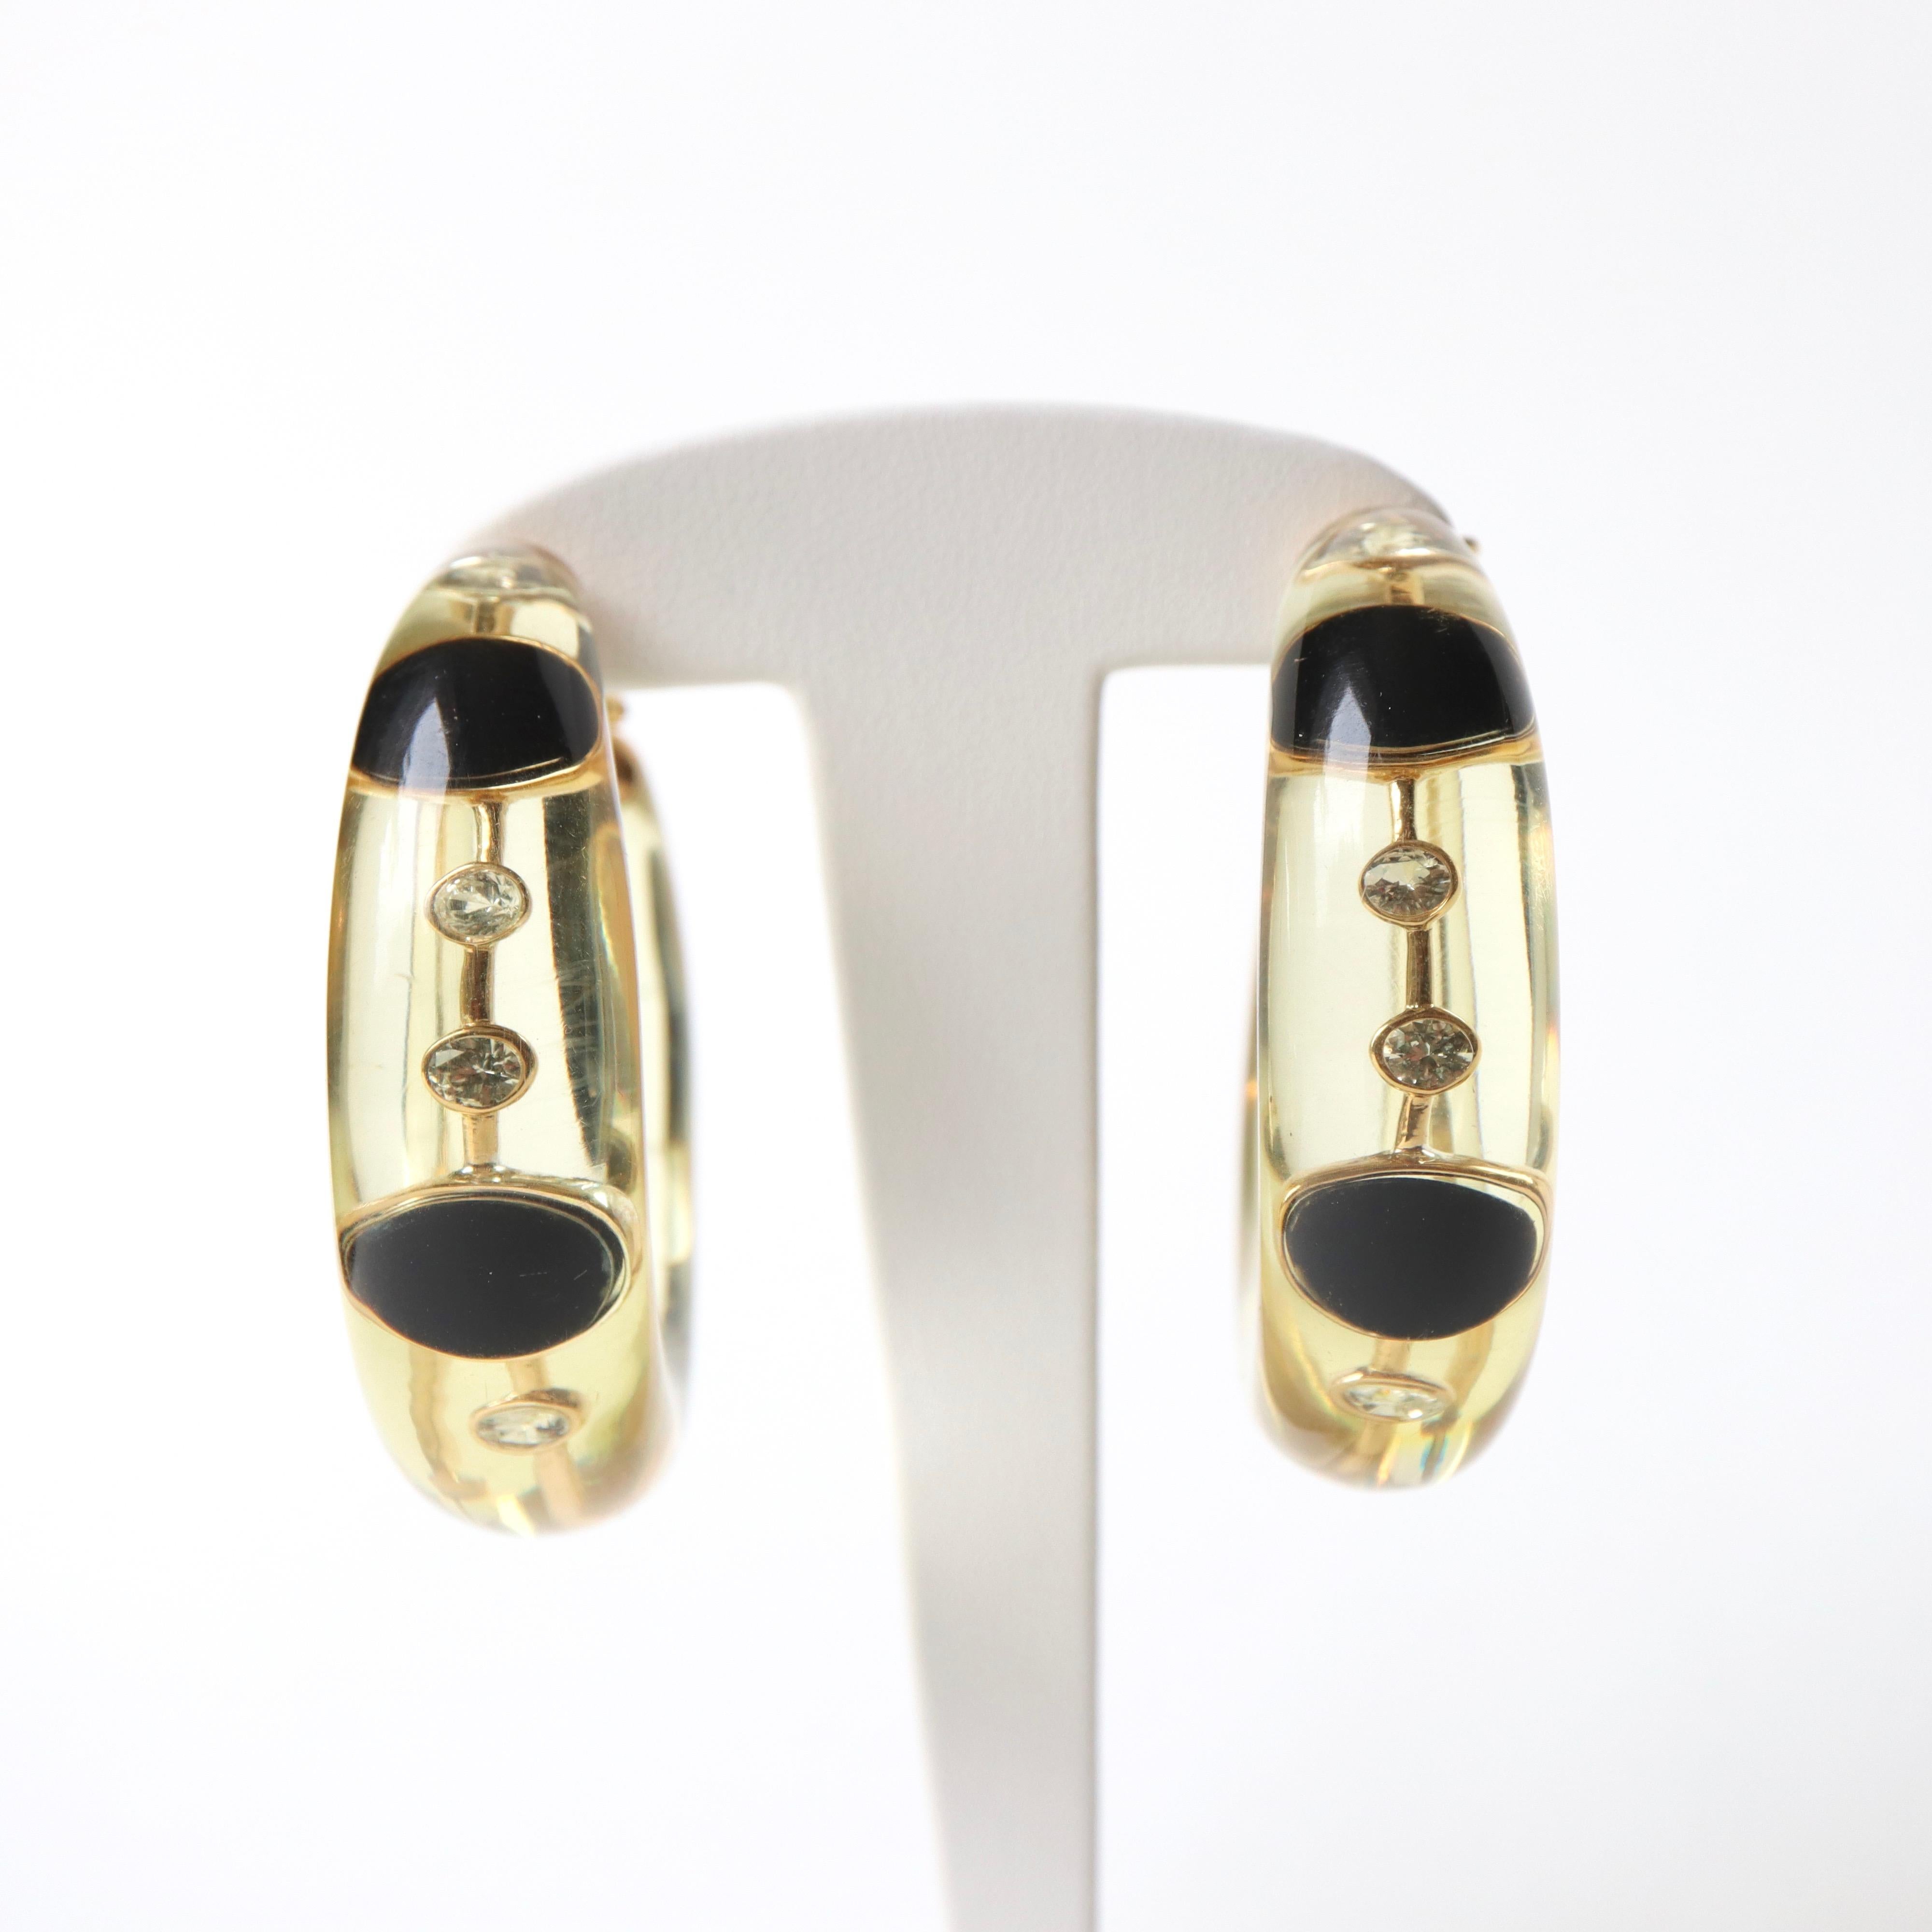 Pascal MORABITO Resin Hoop Earrings, 18K yellow Gold, Diamonds and Onyx Cast in transparent Resin.
Each Earring contains 4 Diamonds and 2 Onyx. Signed Pascal Morabito
Gross Weight: 58g Diameter: about 5cm